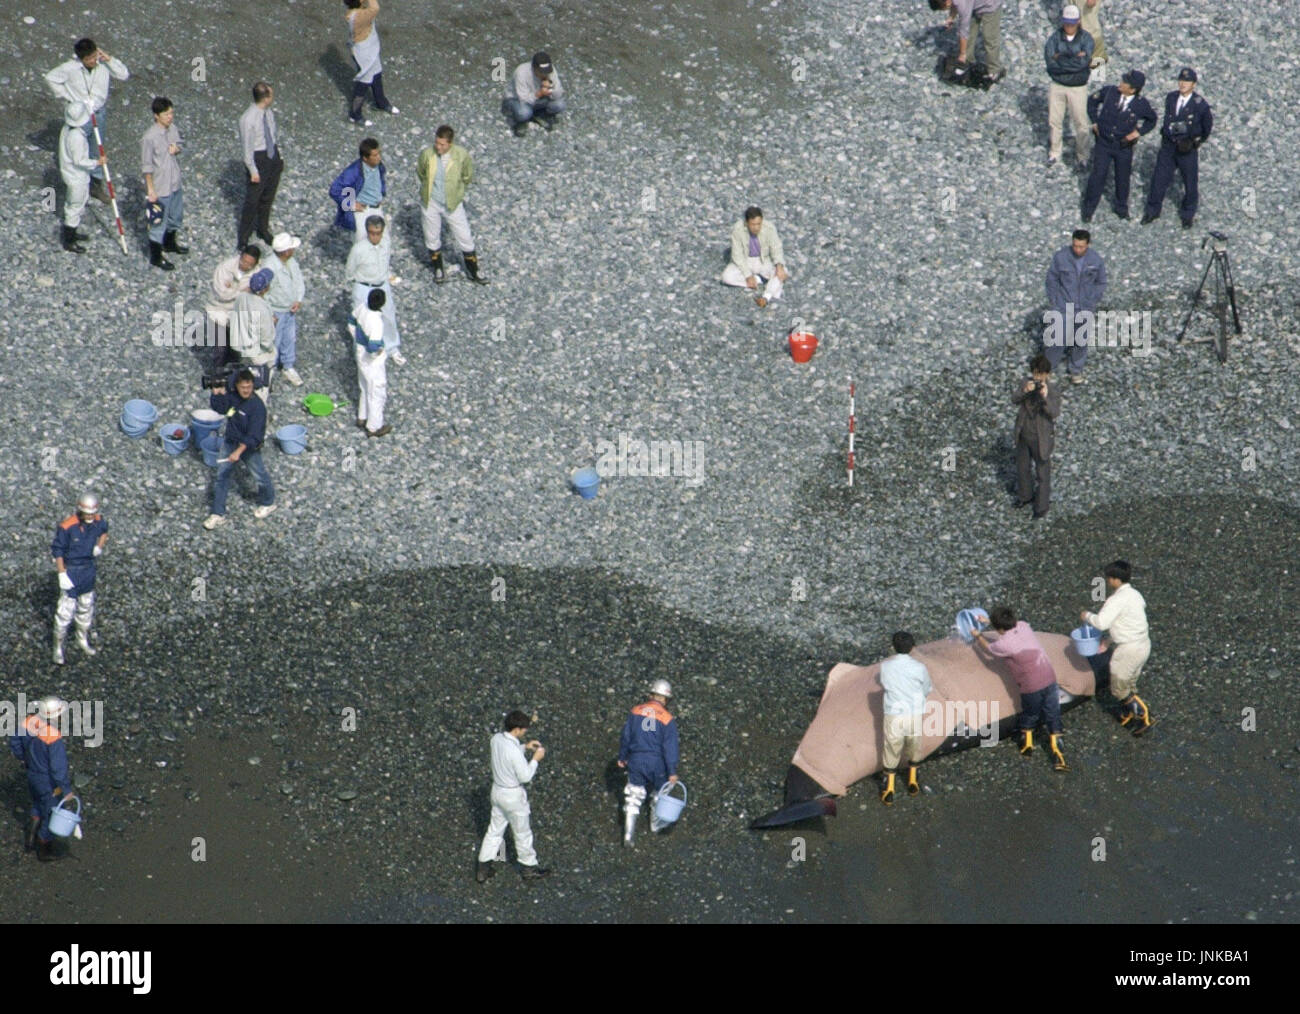 NINOMIYA, Japan - Local residents watch as their colleagues pour sea water on a beached whale to keep it alive in Ninomiya, Kanagawa Prefecture, on Oct. 21. The 5-meter-long whale, believed to be a Hubbs' beaked whale, was confirmed dead five hours later. (Kyodo) Stock Photo